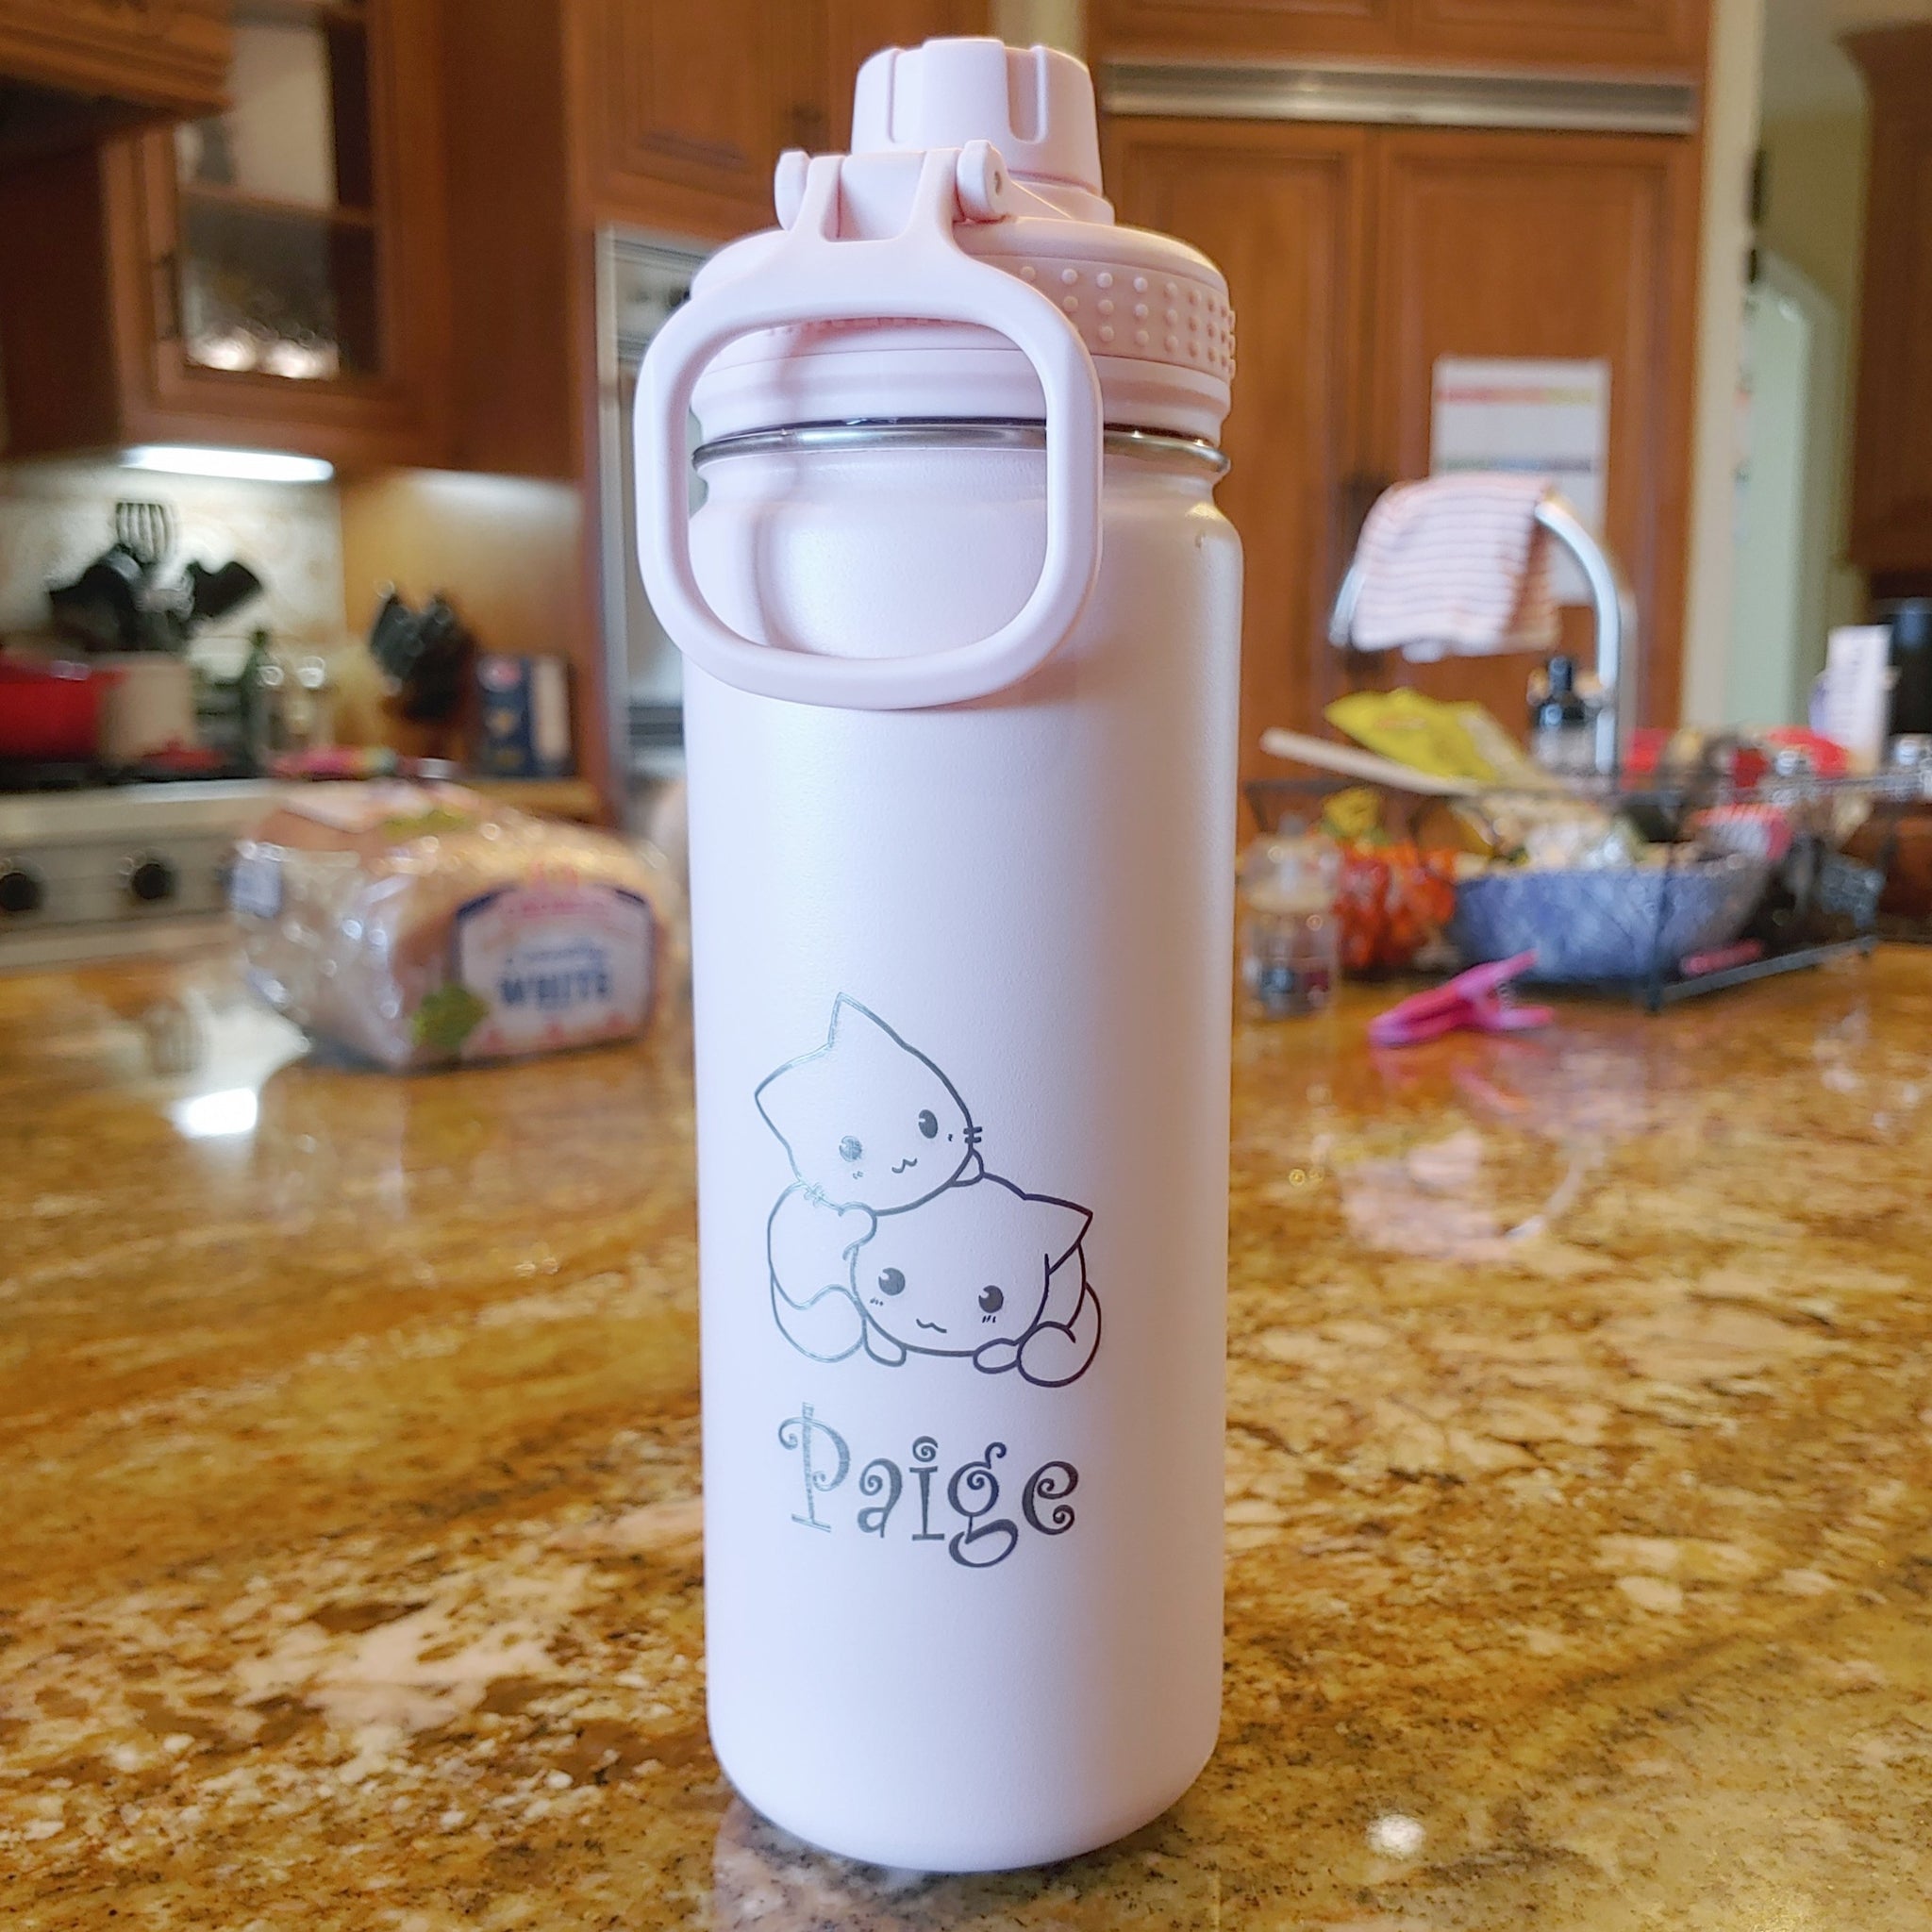 ACADEMY WATER BOTTLE – RCMakes